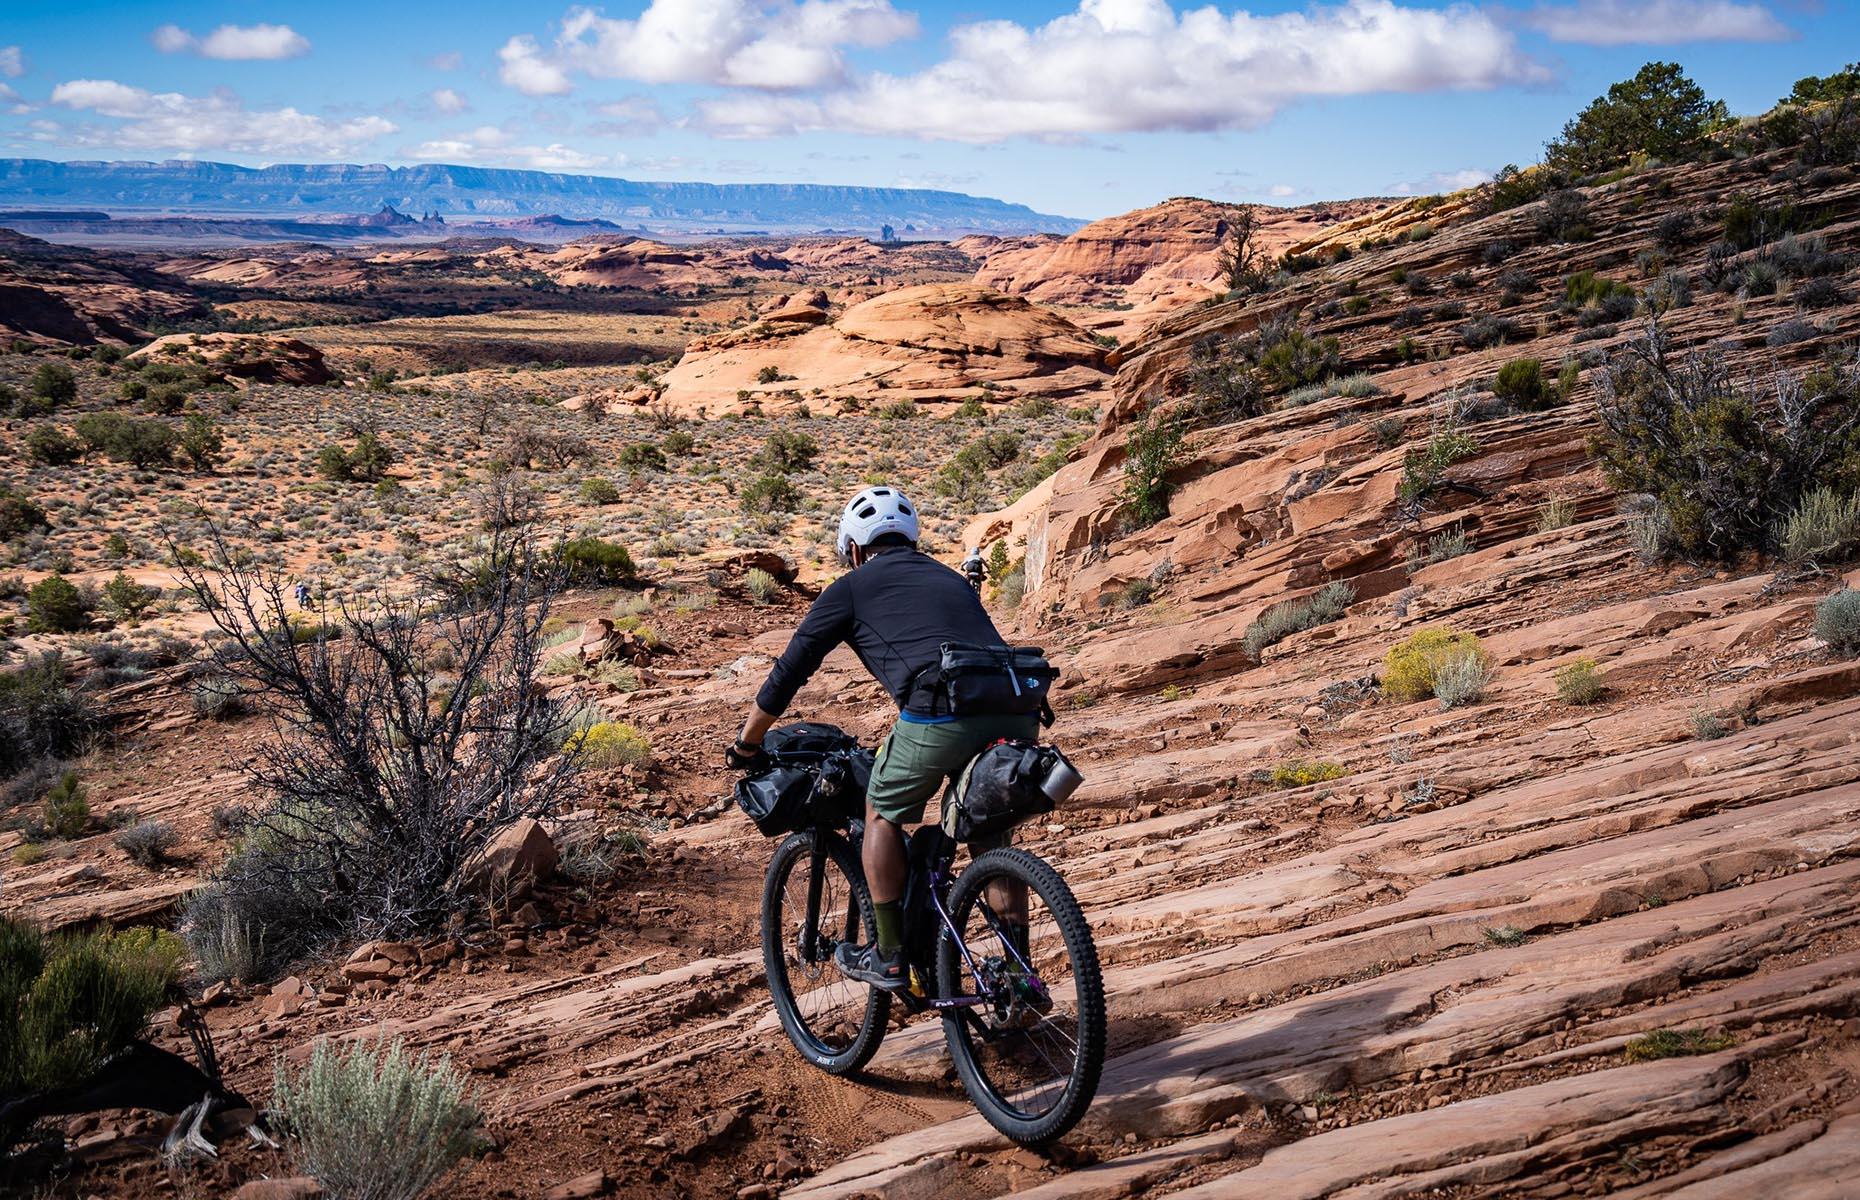 These bike tours are not for novice cyclists, however, as the 44-mile journey across the legendary landscapes of the southern part of Monument Valley and the Hunts Mesa rock formation include an elevation gain of more than 1,500 feet. The Navajo Nation itself measures more than 27,000 square miles, making it larger than 10 US states, so there’s a vast wealth of experiences and culture to discover.